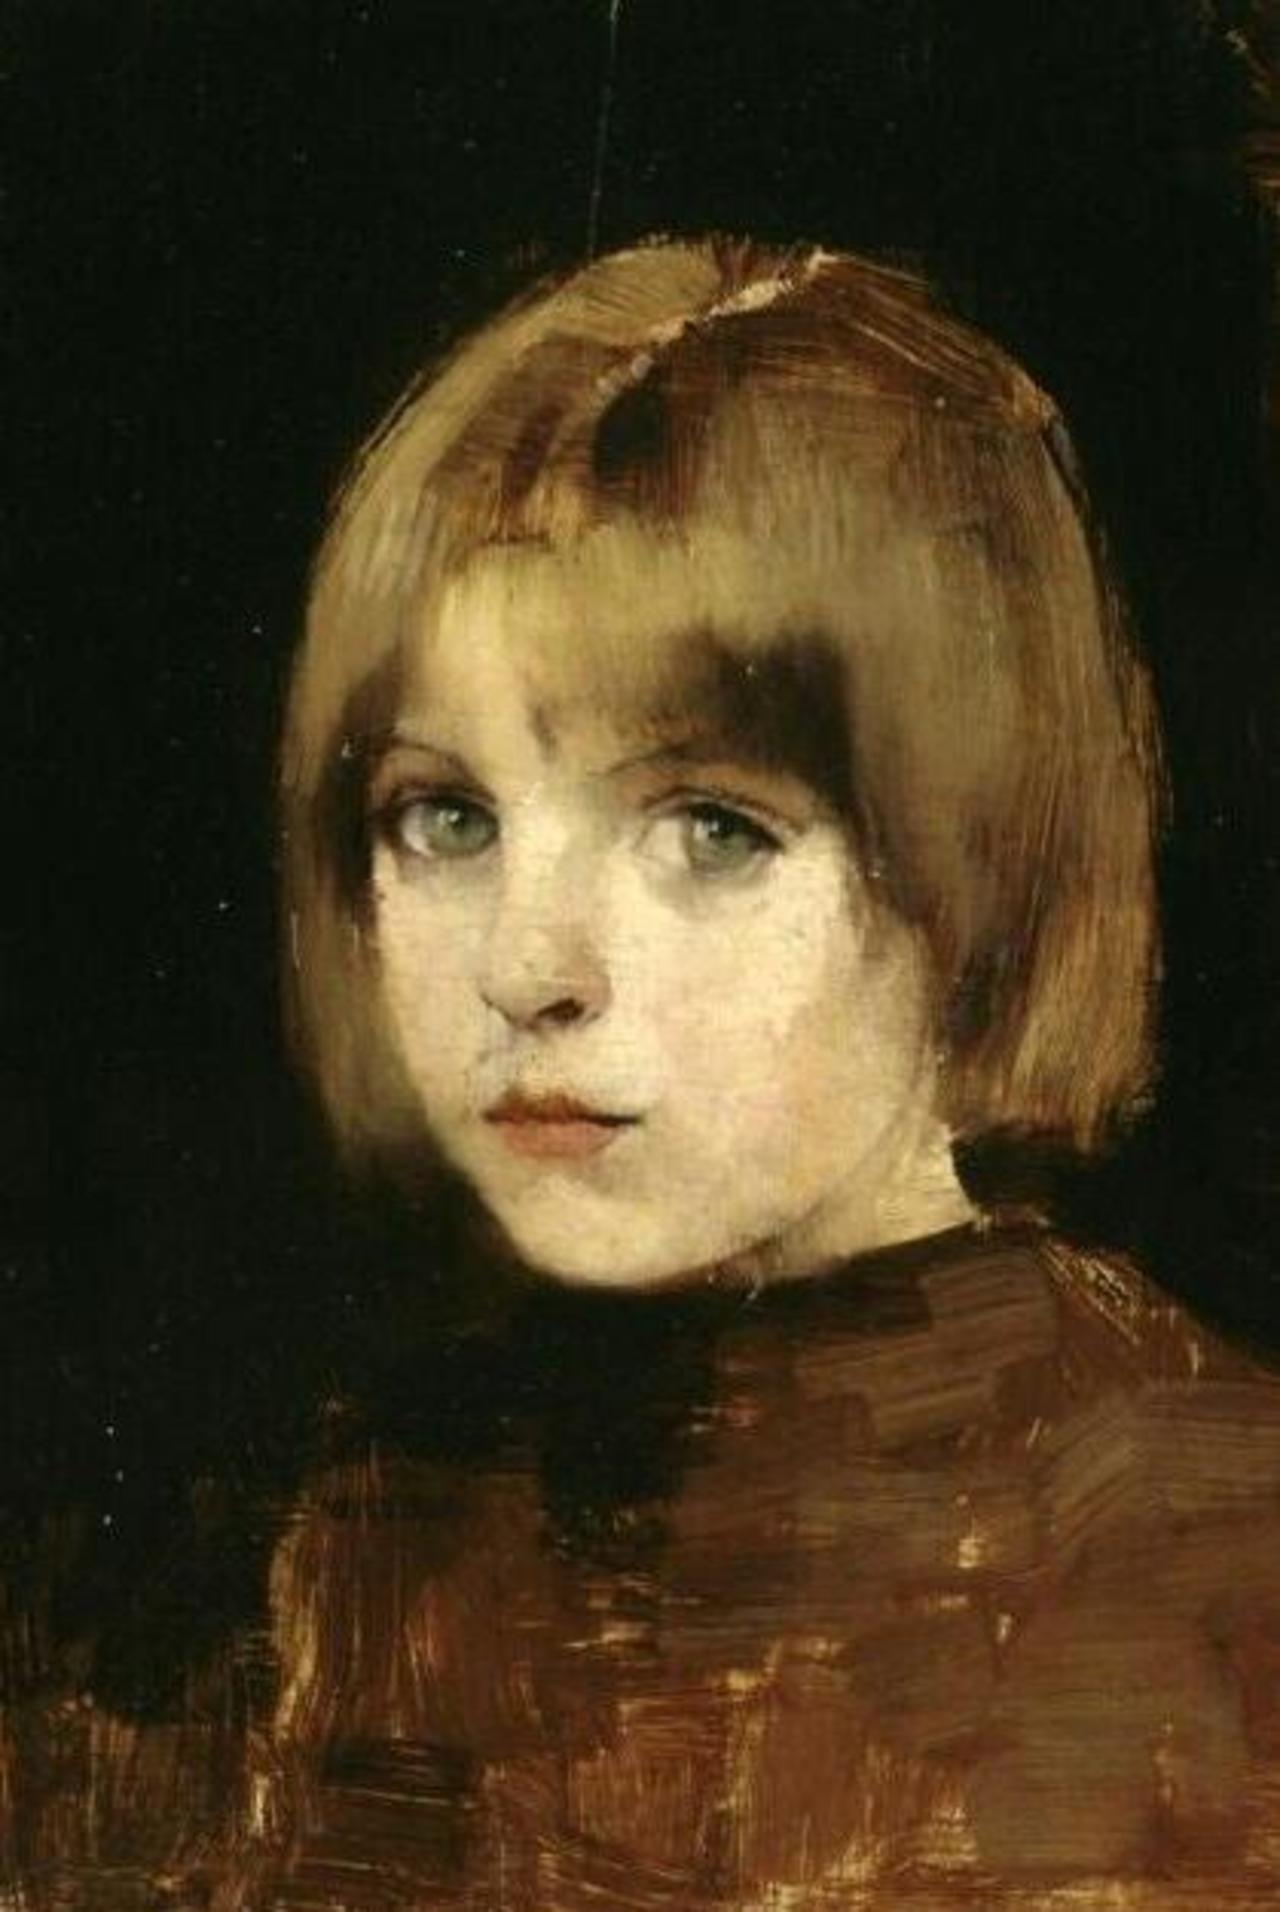 Portrait of a Girl
by Helene (Sofia) Schjerfbeck 1862-1946
Finnish. Realism. http://t.co/vtENyCzeE7